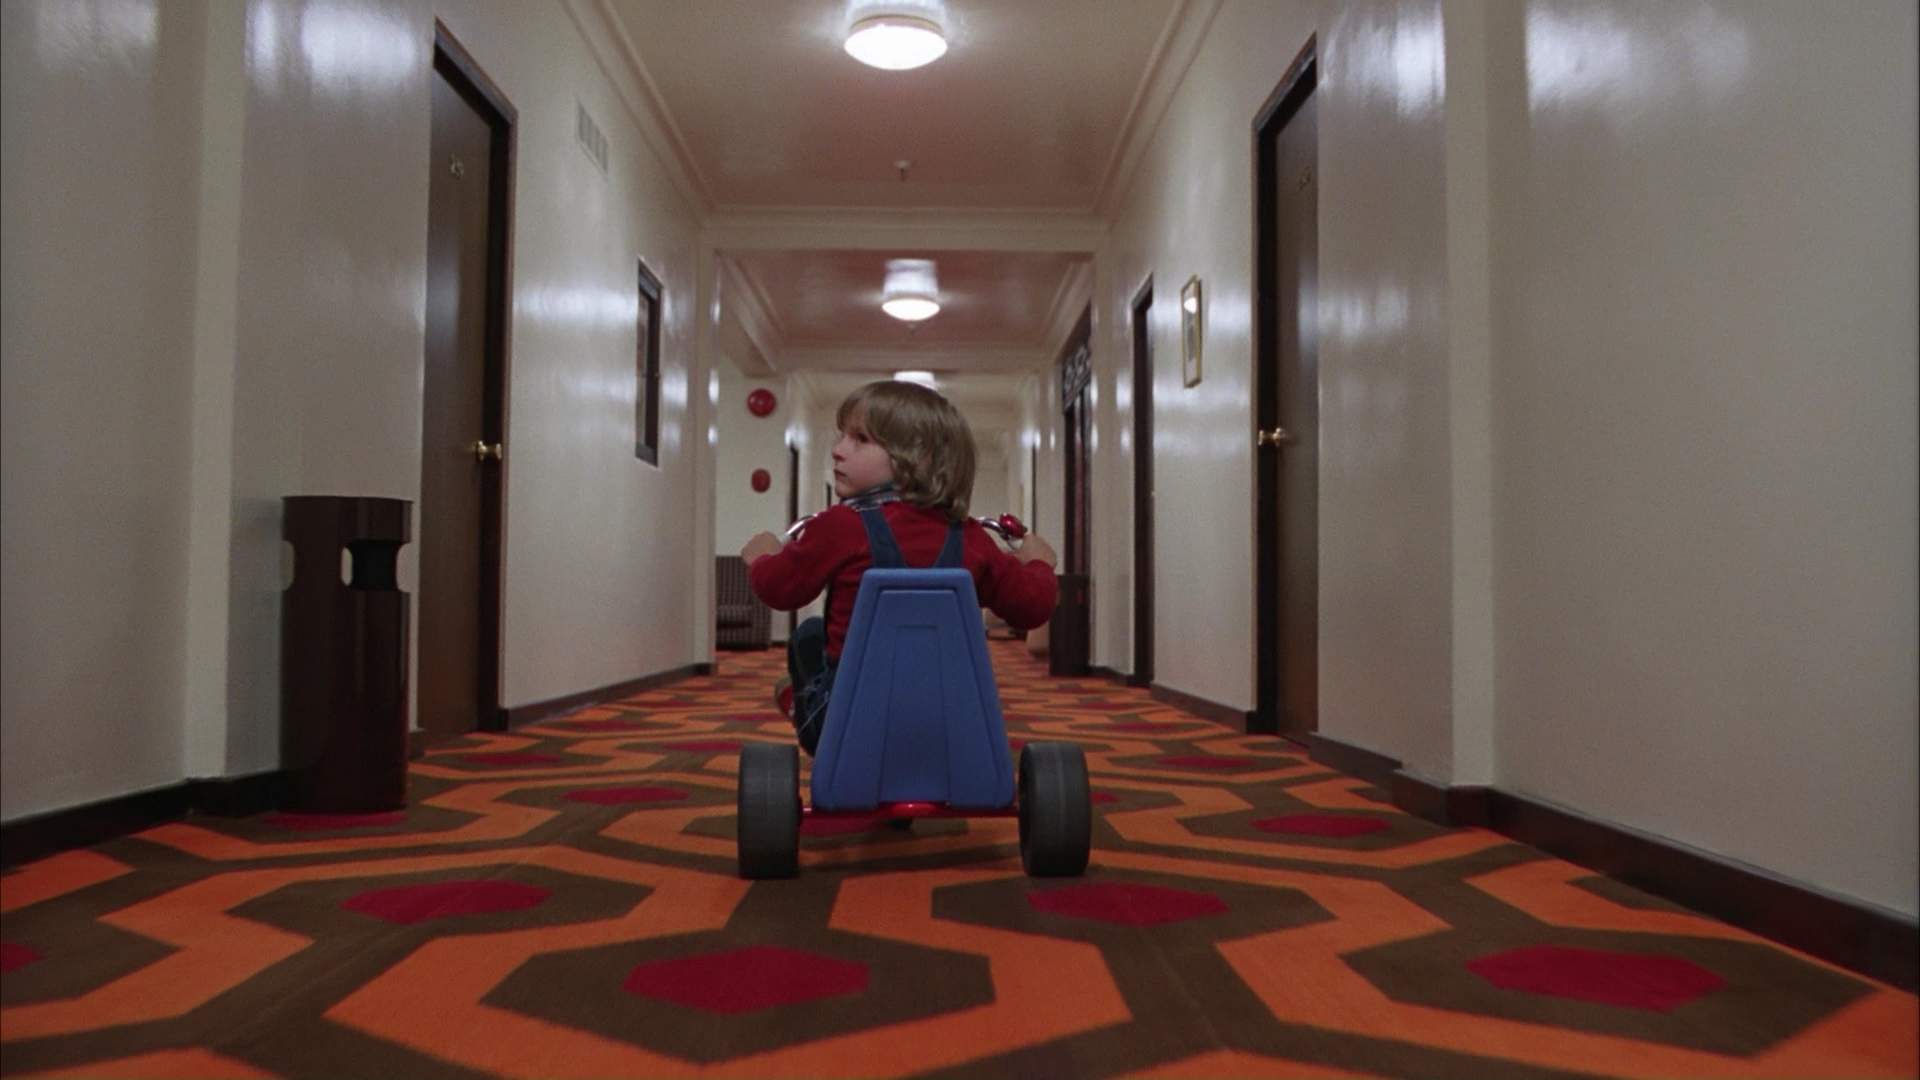 Stephen King's Sequel to The Shining Is Being Adapted Into a Film